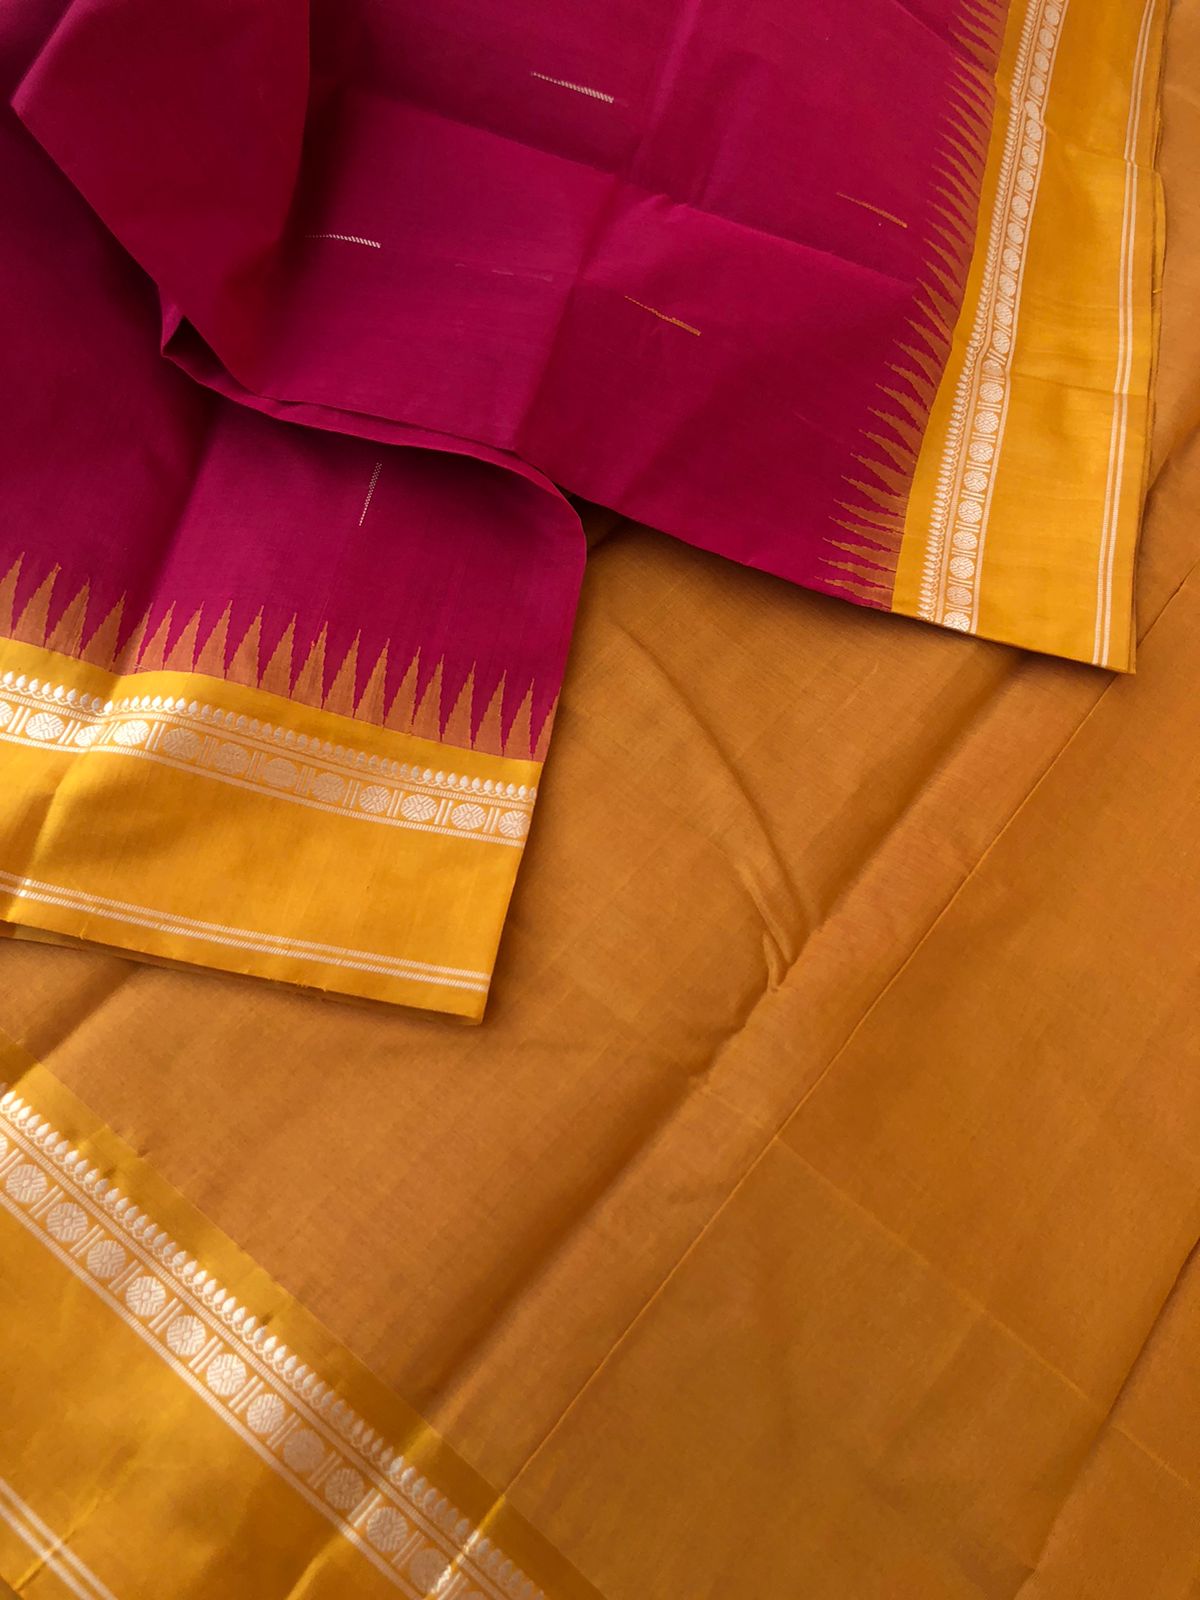 Mira - Our Exclusive Cotton body with Pure Silk Korvai Borders - kum kum red short red with malli mokku woven buttas with mustard borders and pallu